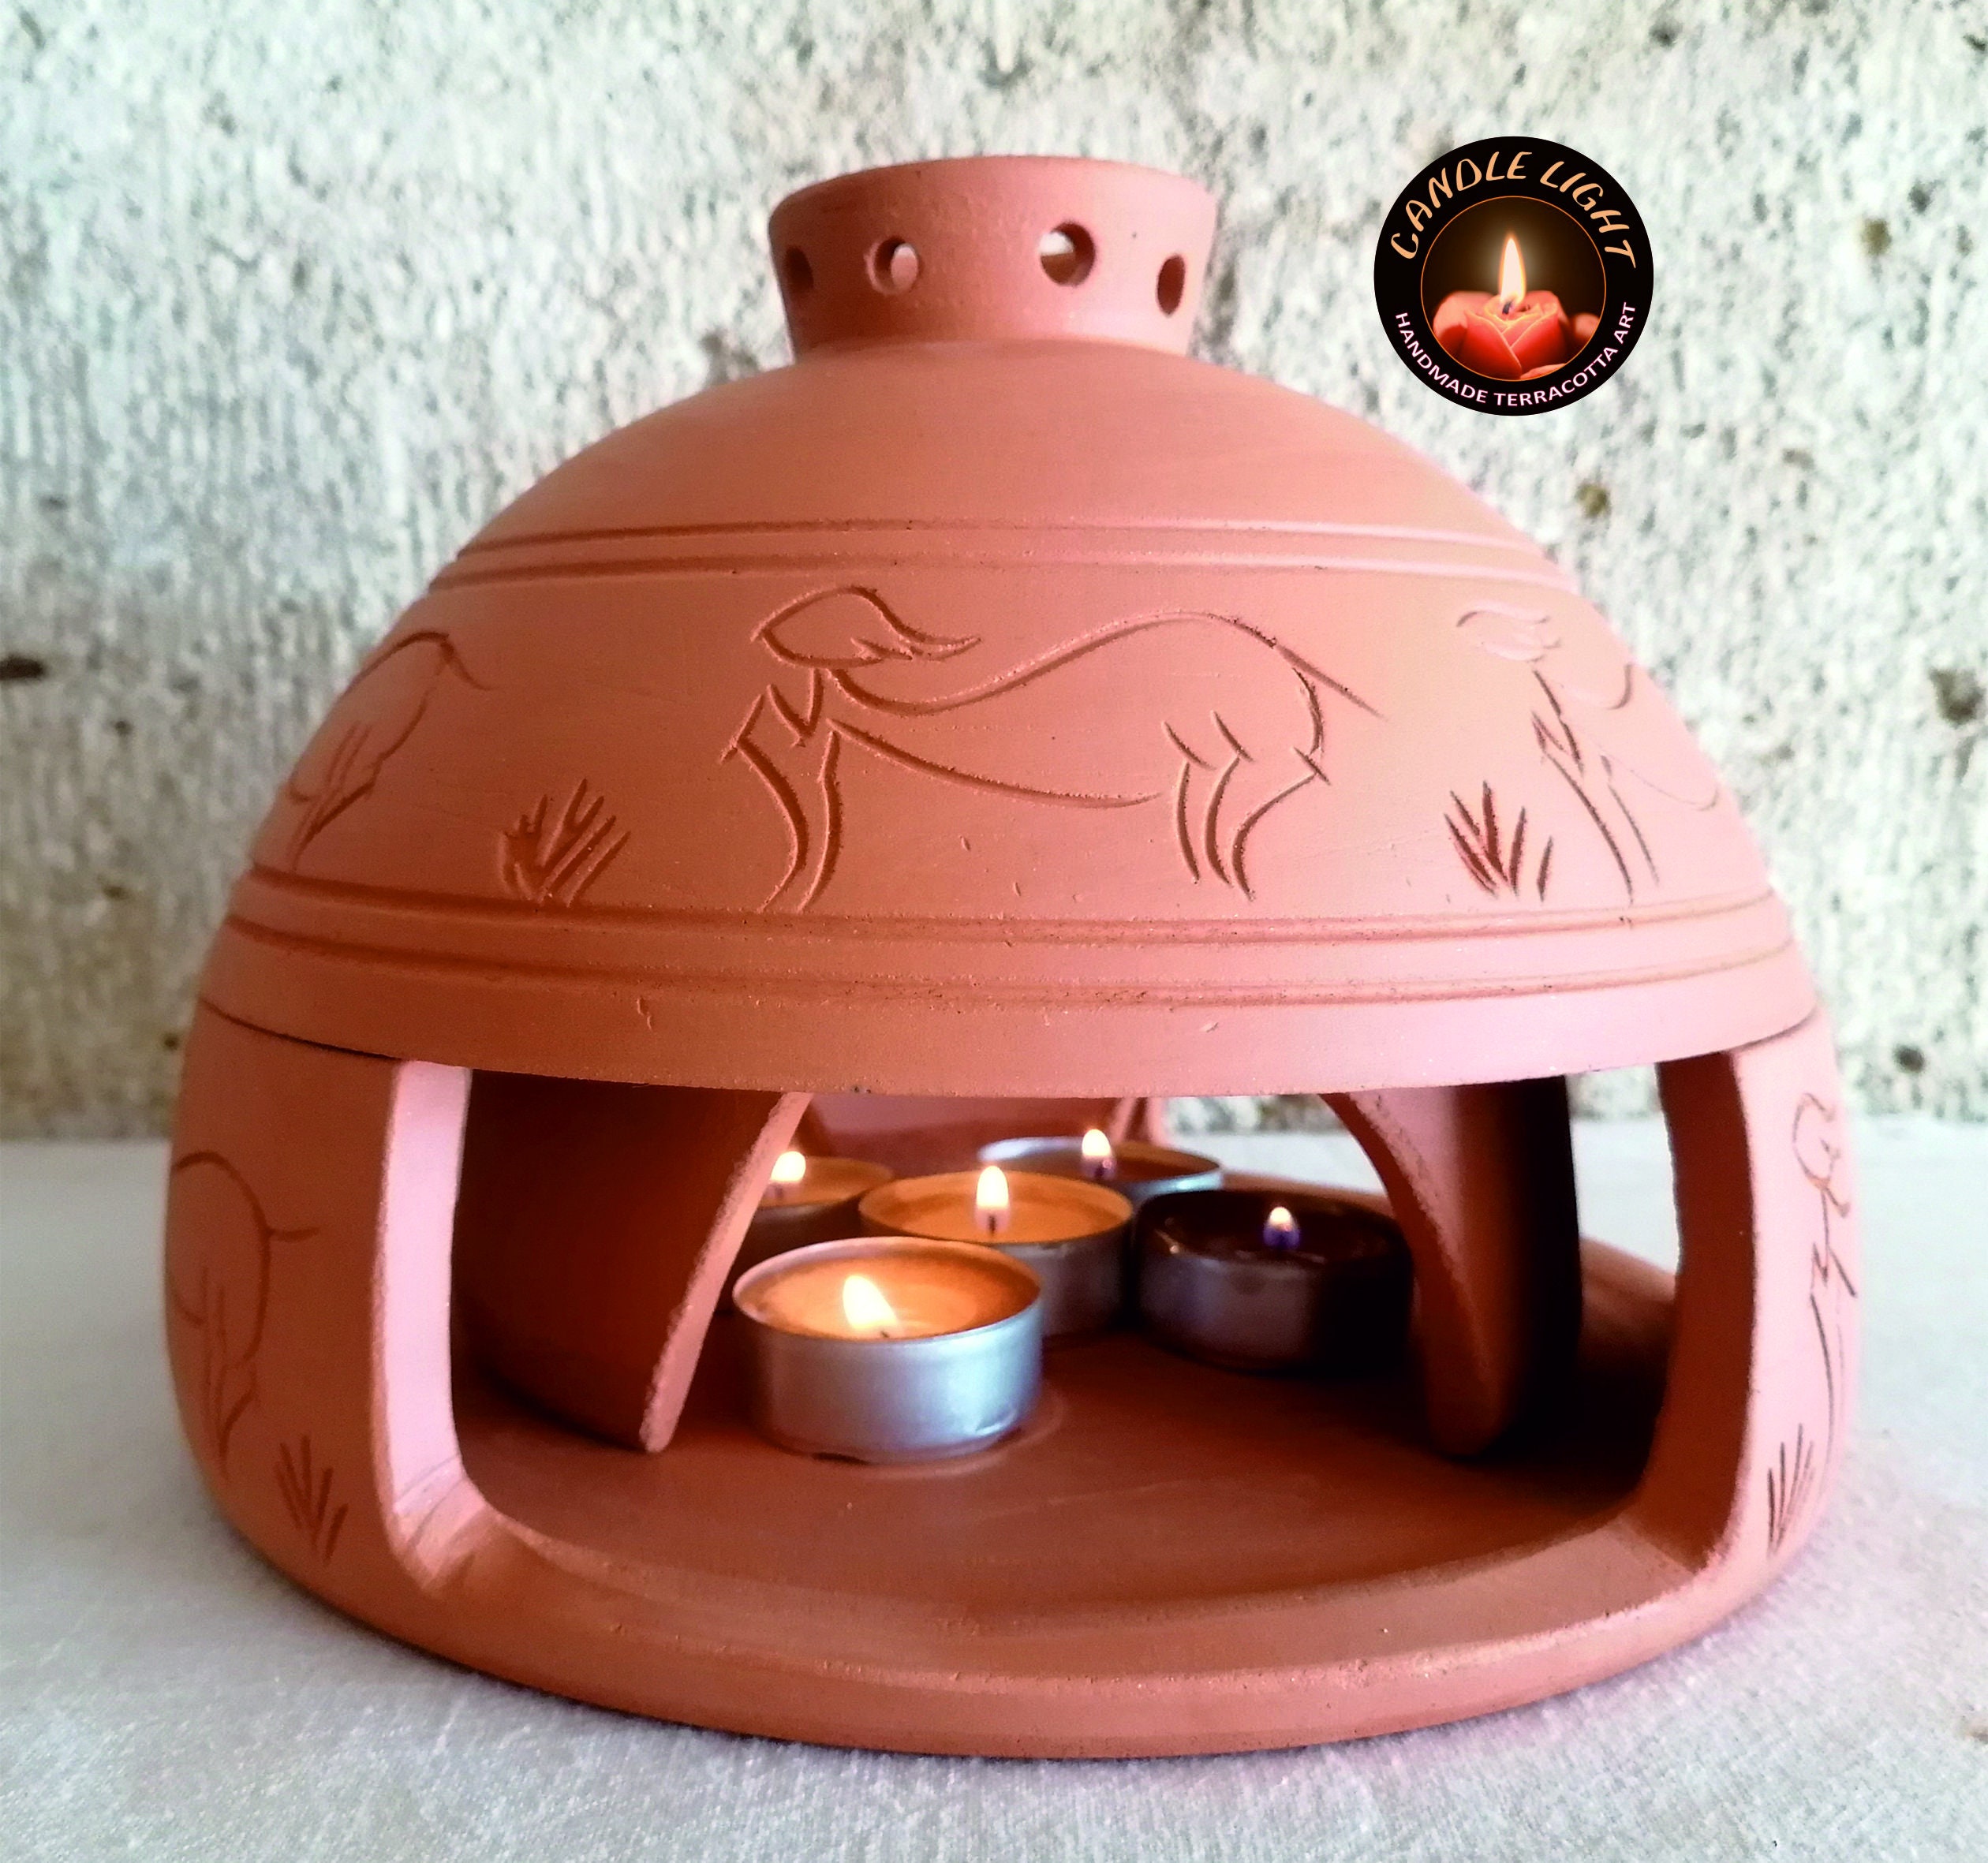 Handcrafted Ceramic White Dimpled Boiler With Candle Stove - MASU